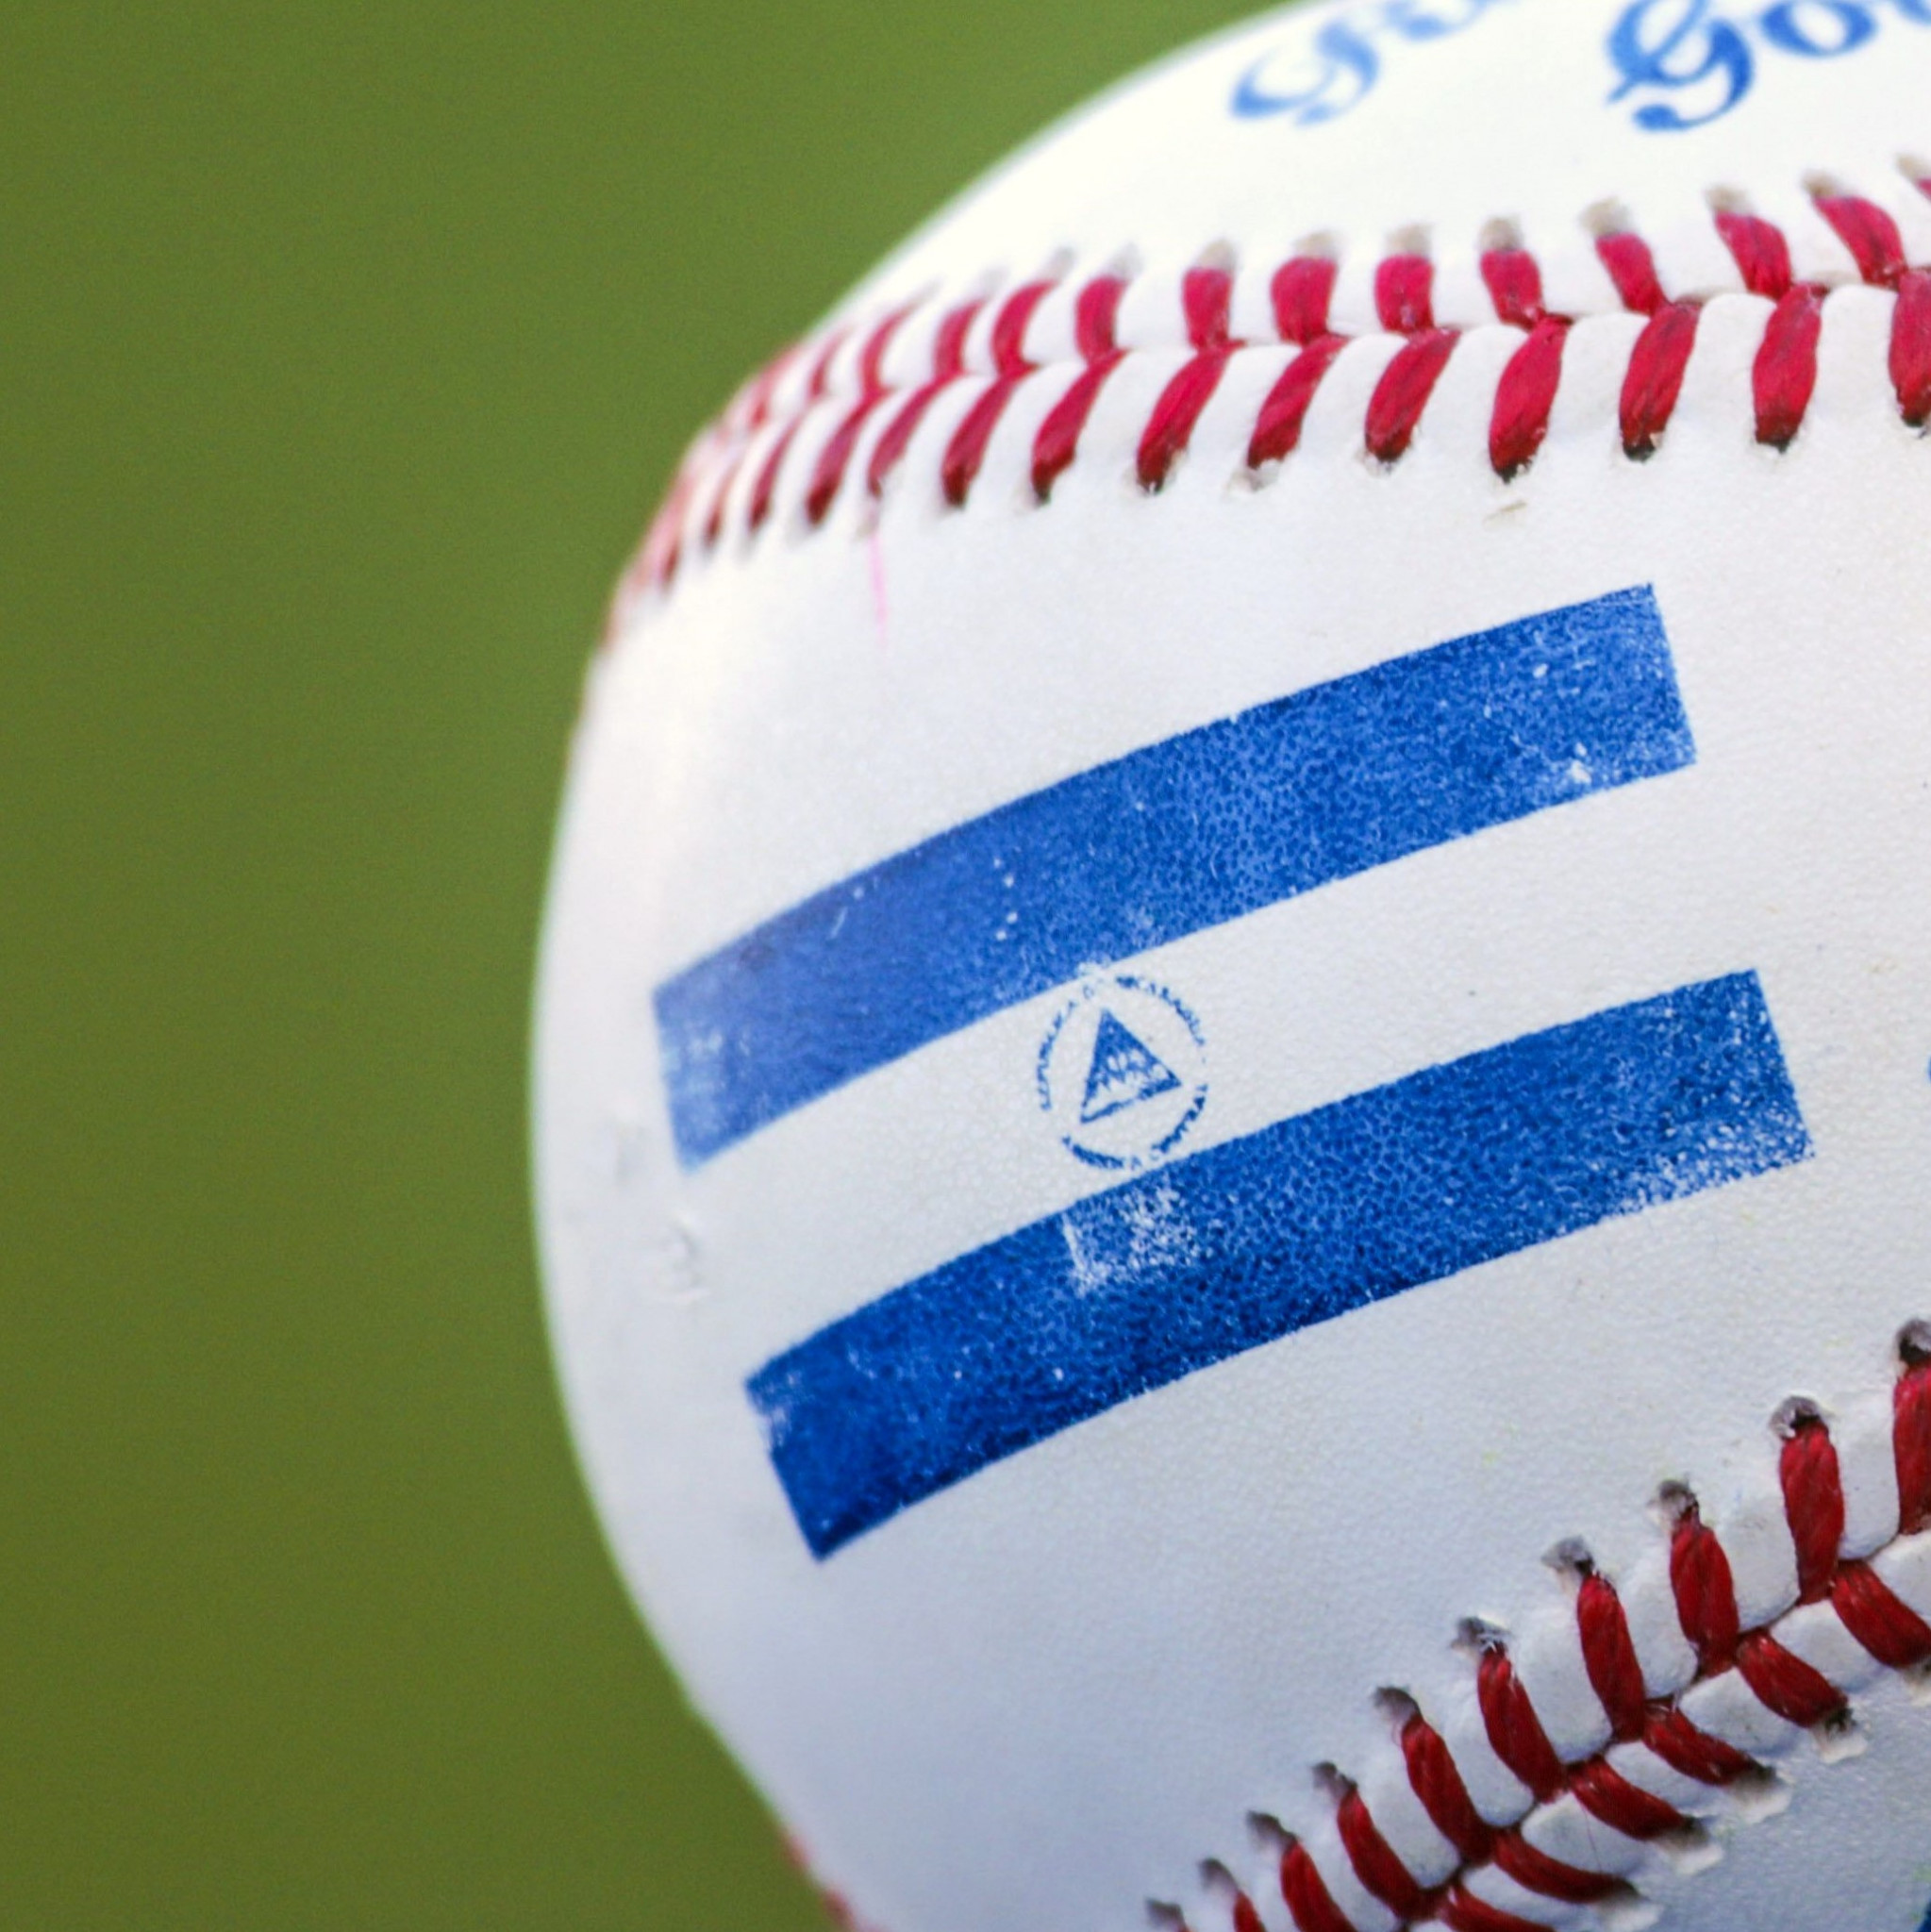 Nicaragua qualify for first World Baseball Classic